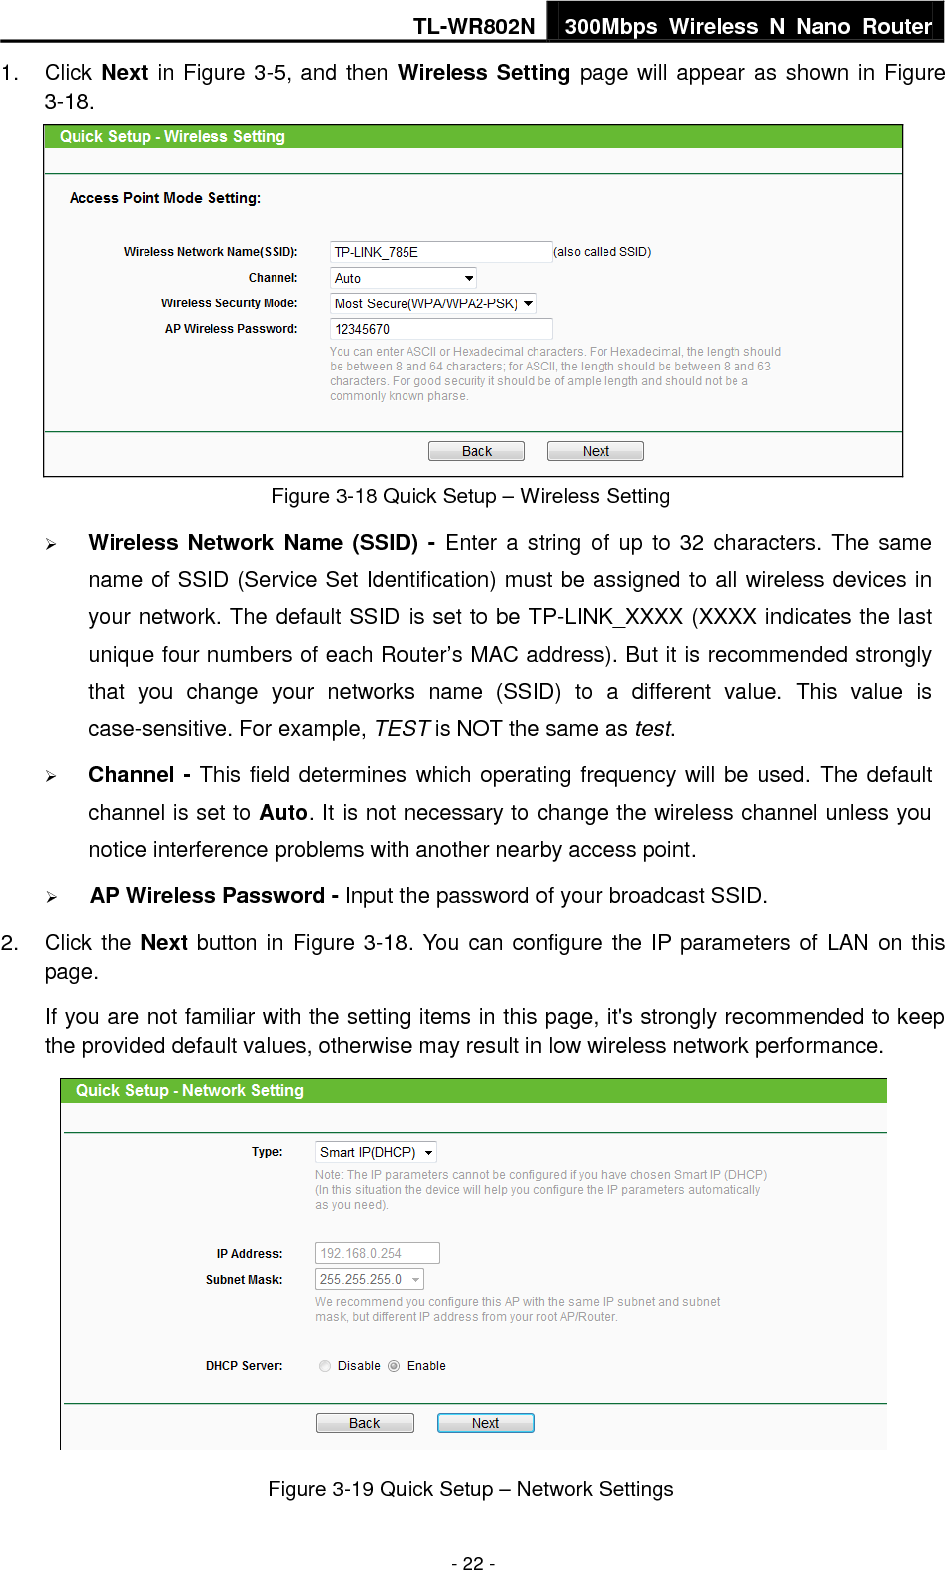 TL-WR802N 300Mbps  Wireless  N  Nano  Router  - 22 - 1.  Click Next in Figure 3-5, and then Wireless Setting page will appear as shown in Figure 3-18.    Figure 3-18 Quick Setup – Wireless Setting  Wireless Network Name (SSID) -  Enter a  string of up  to 32 characters. The  same name of SSID (Service Set Identification) must be assigned to all wireless devices in your network. The default SSID is set to be TP-LINK_XXXX (XXXX indicates the last unique four numbers of each Router’s MAC address). But it is recommended strongly that  you  change  your  networks  name  (SSID)  to  a  different  value.  This  value  is case-sensitive. For example, TEST is NOT the same as test.  Channel - This field determines which operating frequency will be used. The default channel is set to Auto. It is not necessary to change the wireless channel unless you notice interference problems with another nearby access point.  AP Wireless Password - Input the password of your broadcast SSID. 2.  Click the Next button in Figure 3-18. You can configure the IP parameters of LAN on this page. If you are not familiar with the setting items in this page, it&apos;s strongly recommended to keep the provided default values, otherwise may result in low wireless network performance.  Figure 3-19 Quick Setup – Network Settings 